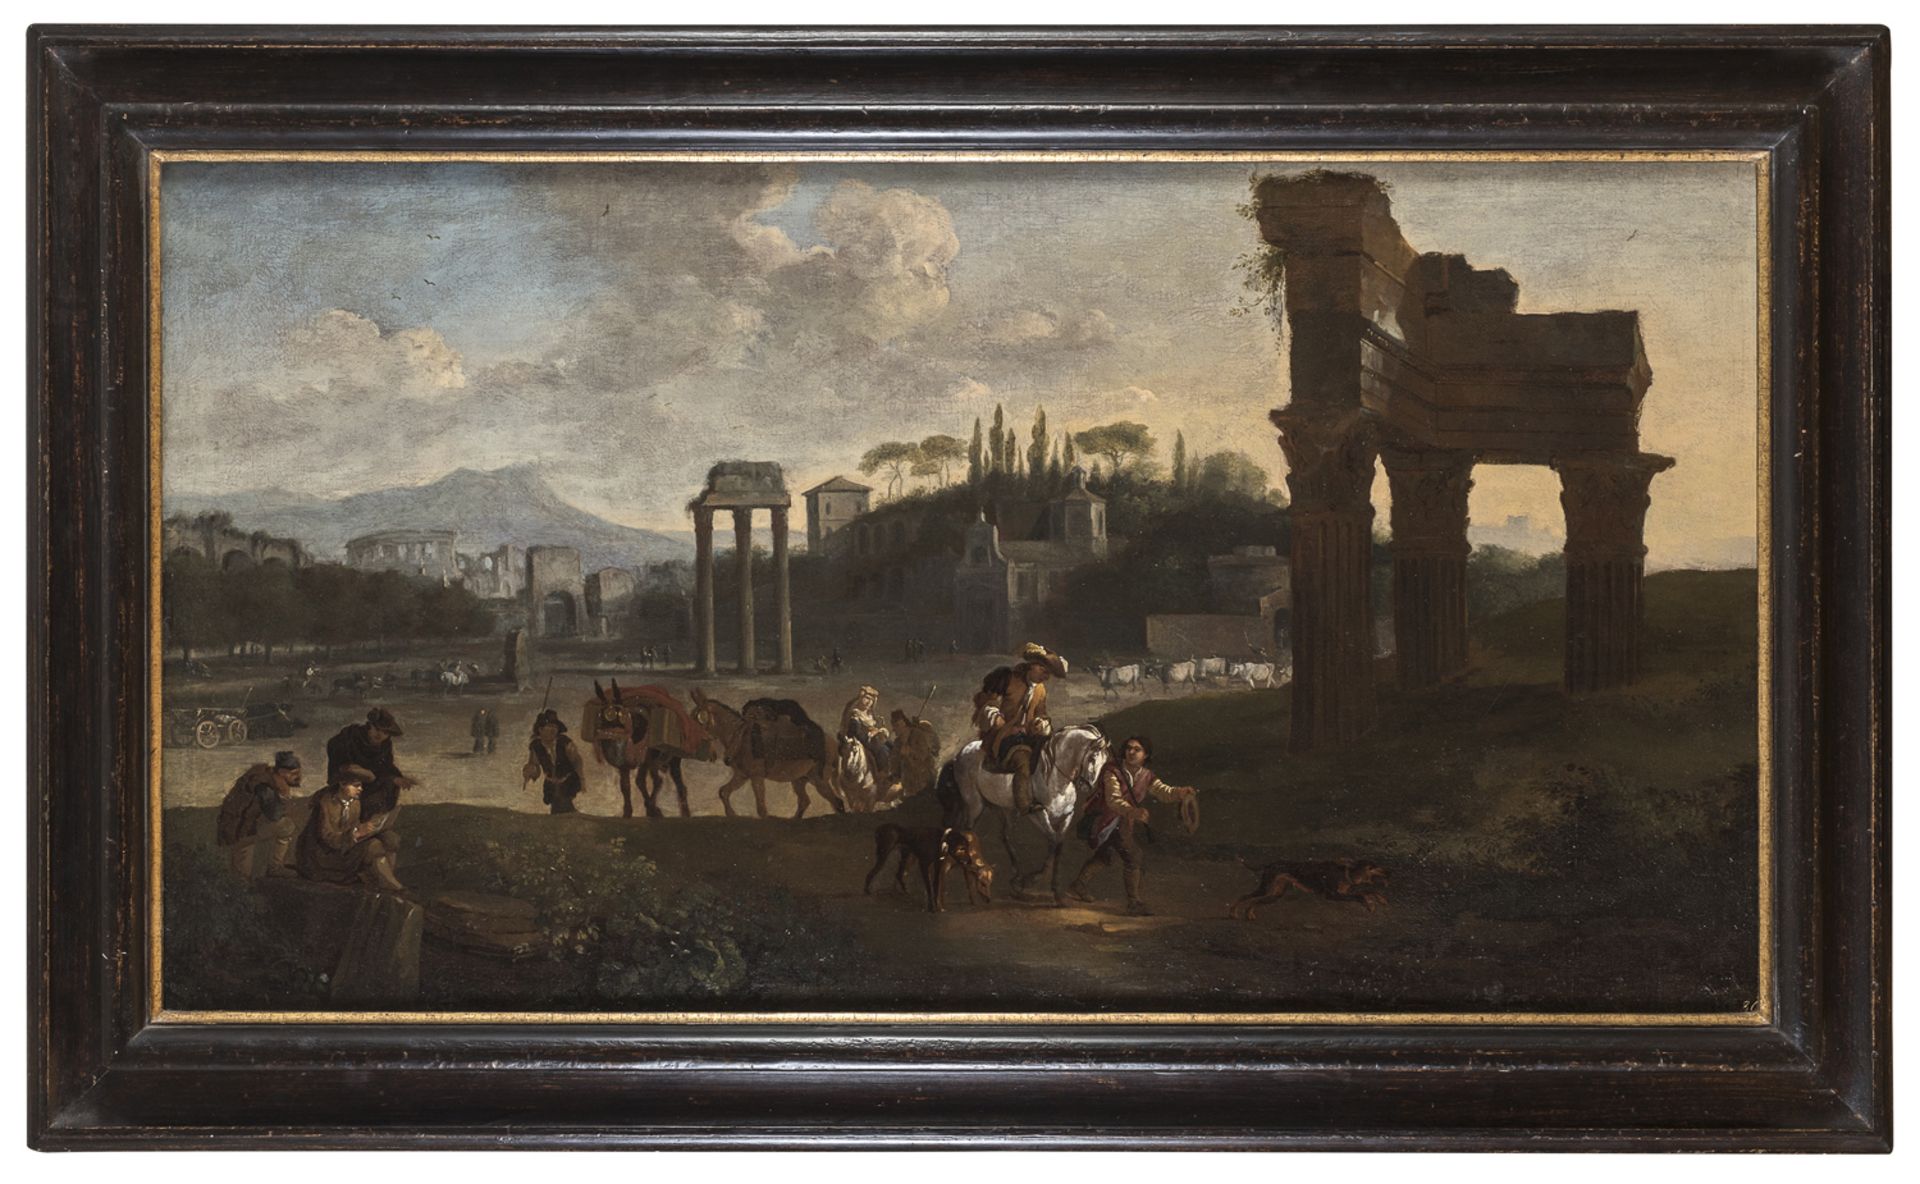 OIL PAINTING OF THE ROMAN FORUM ATTRIBUTED TO PIETER VAN LAER